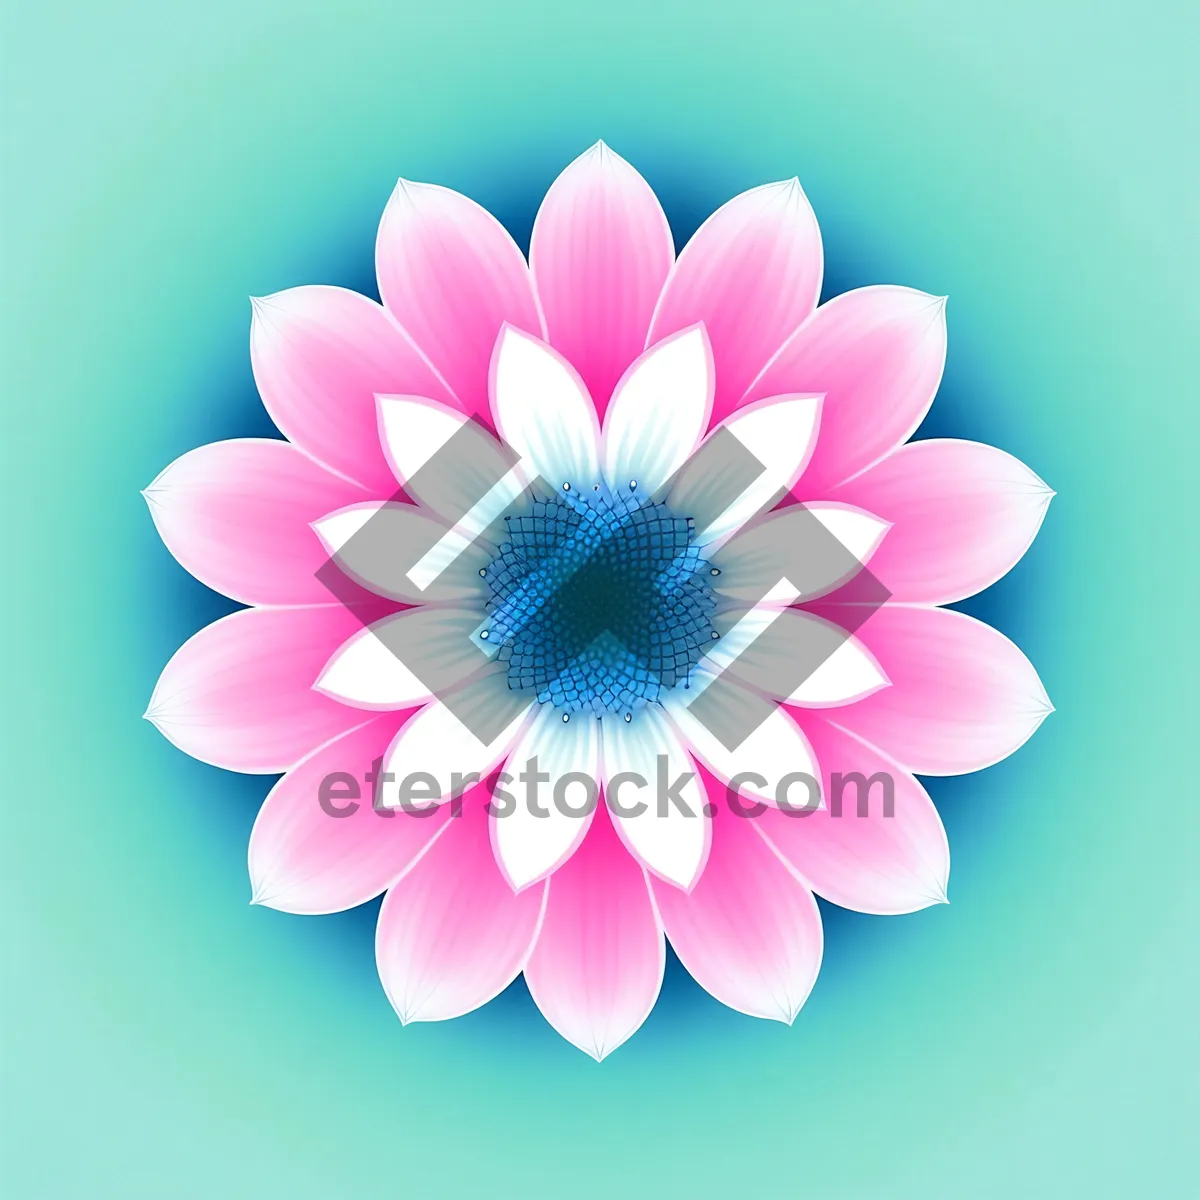 Picture of Colorful Lotus Blossom in Full Bloom